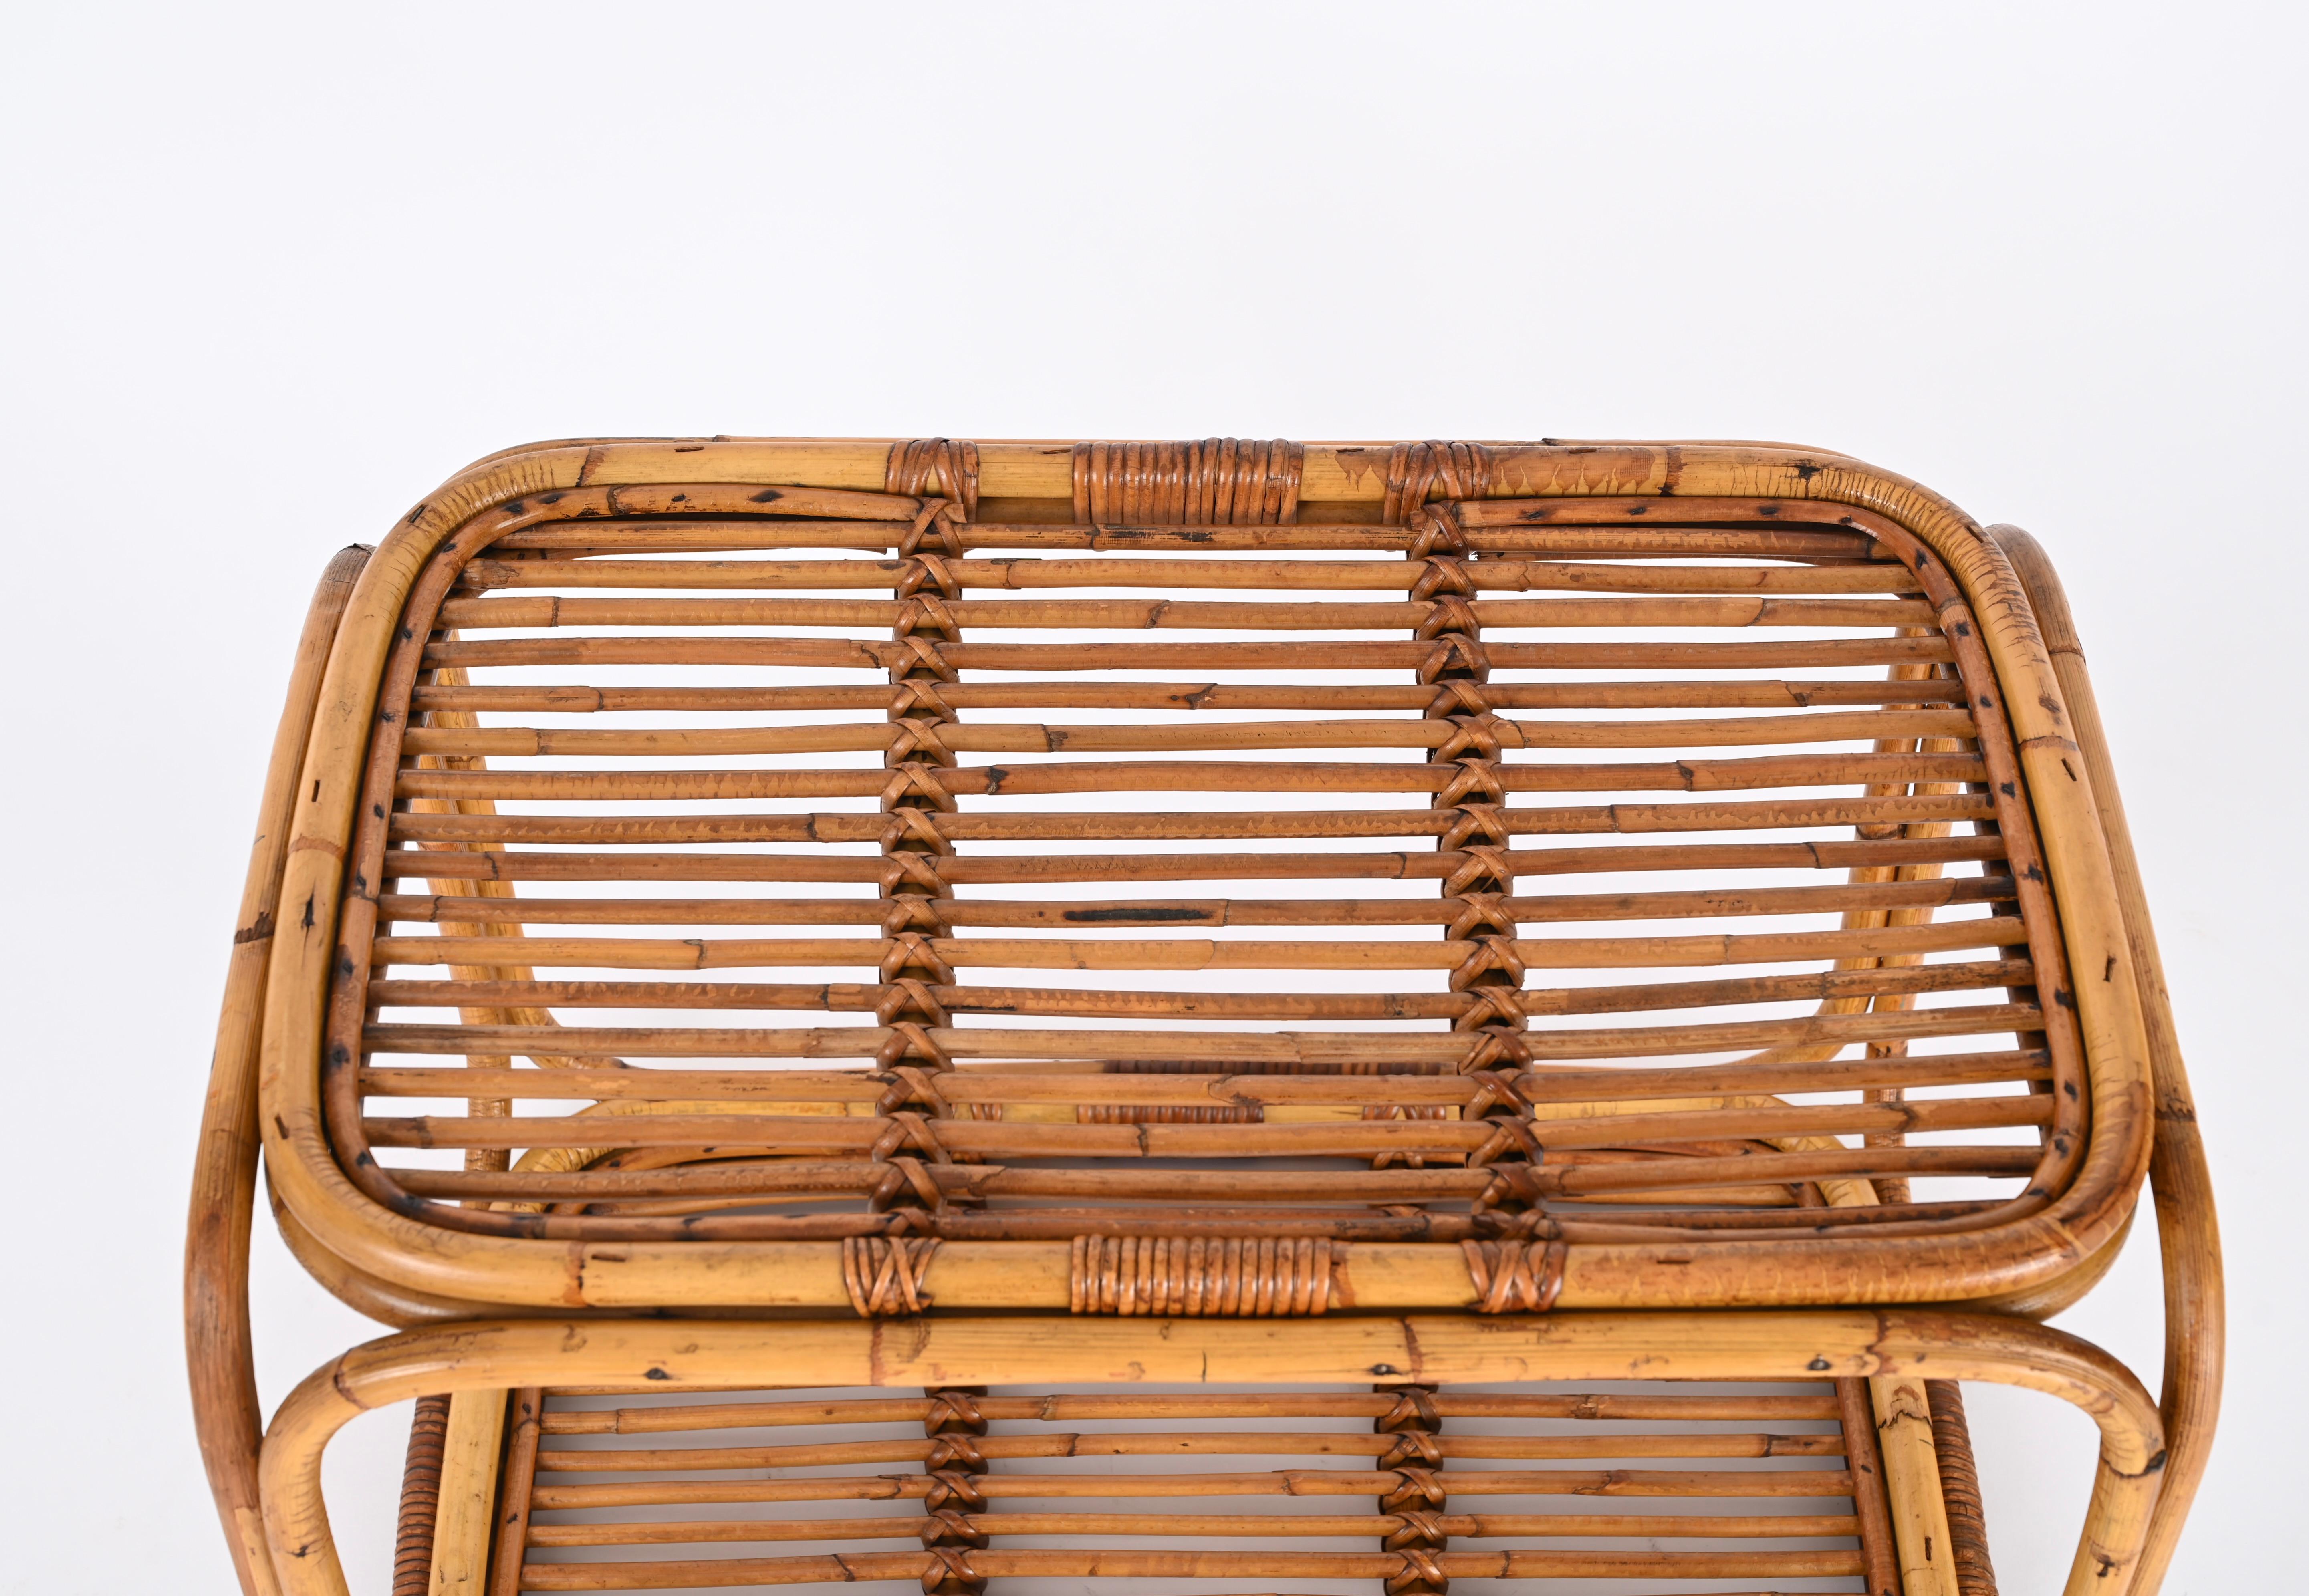 Midcentury Bamboo and Rattan Italian Rectangular Coffee Table, 1960s For Sale 2